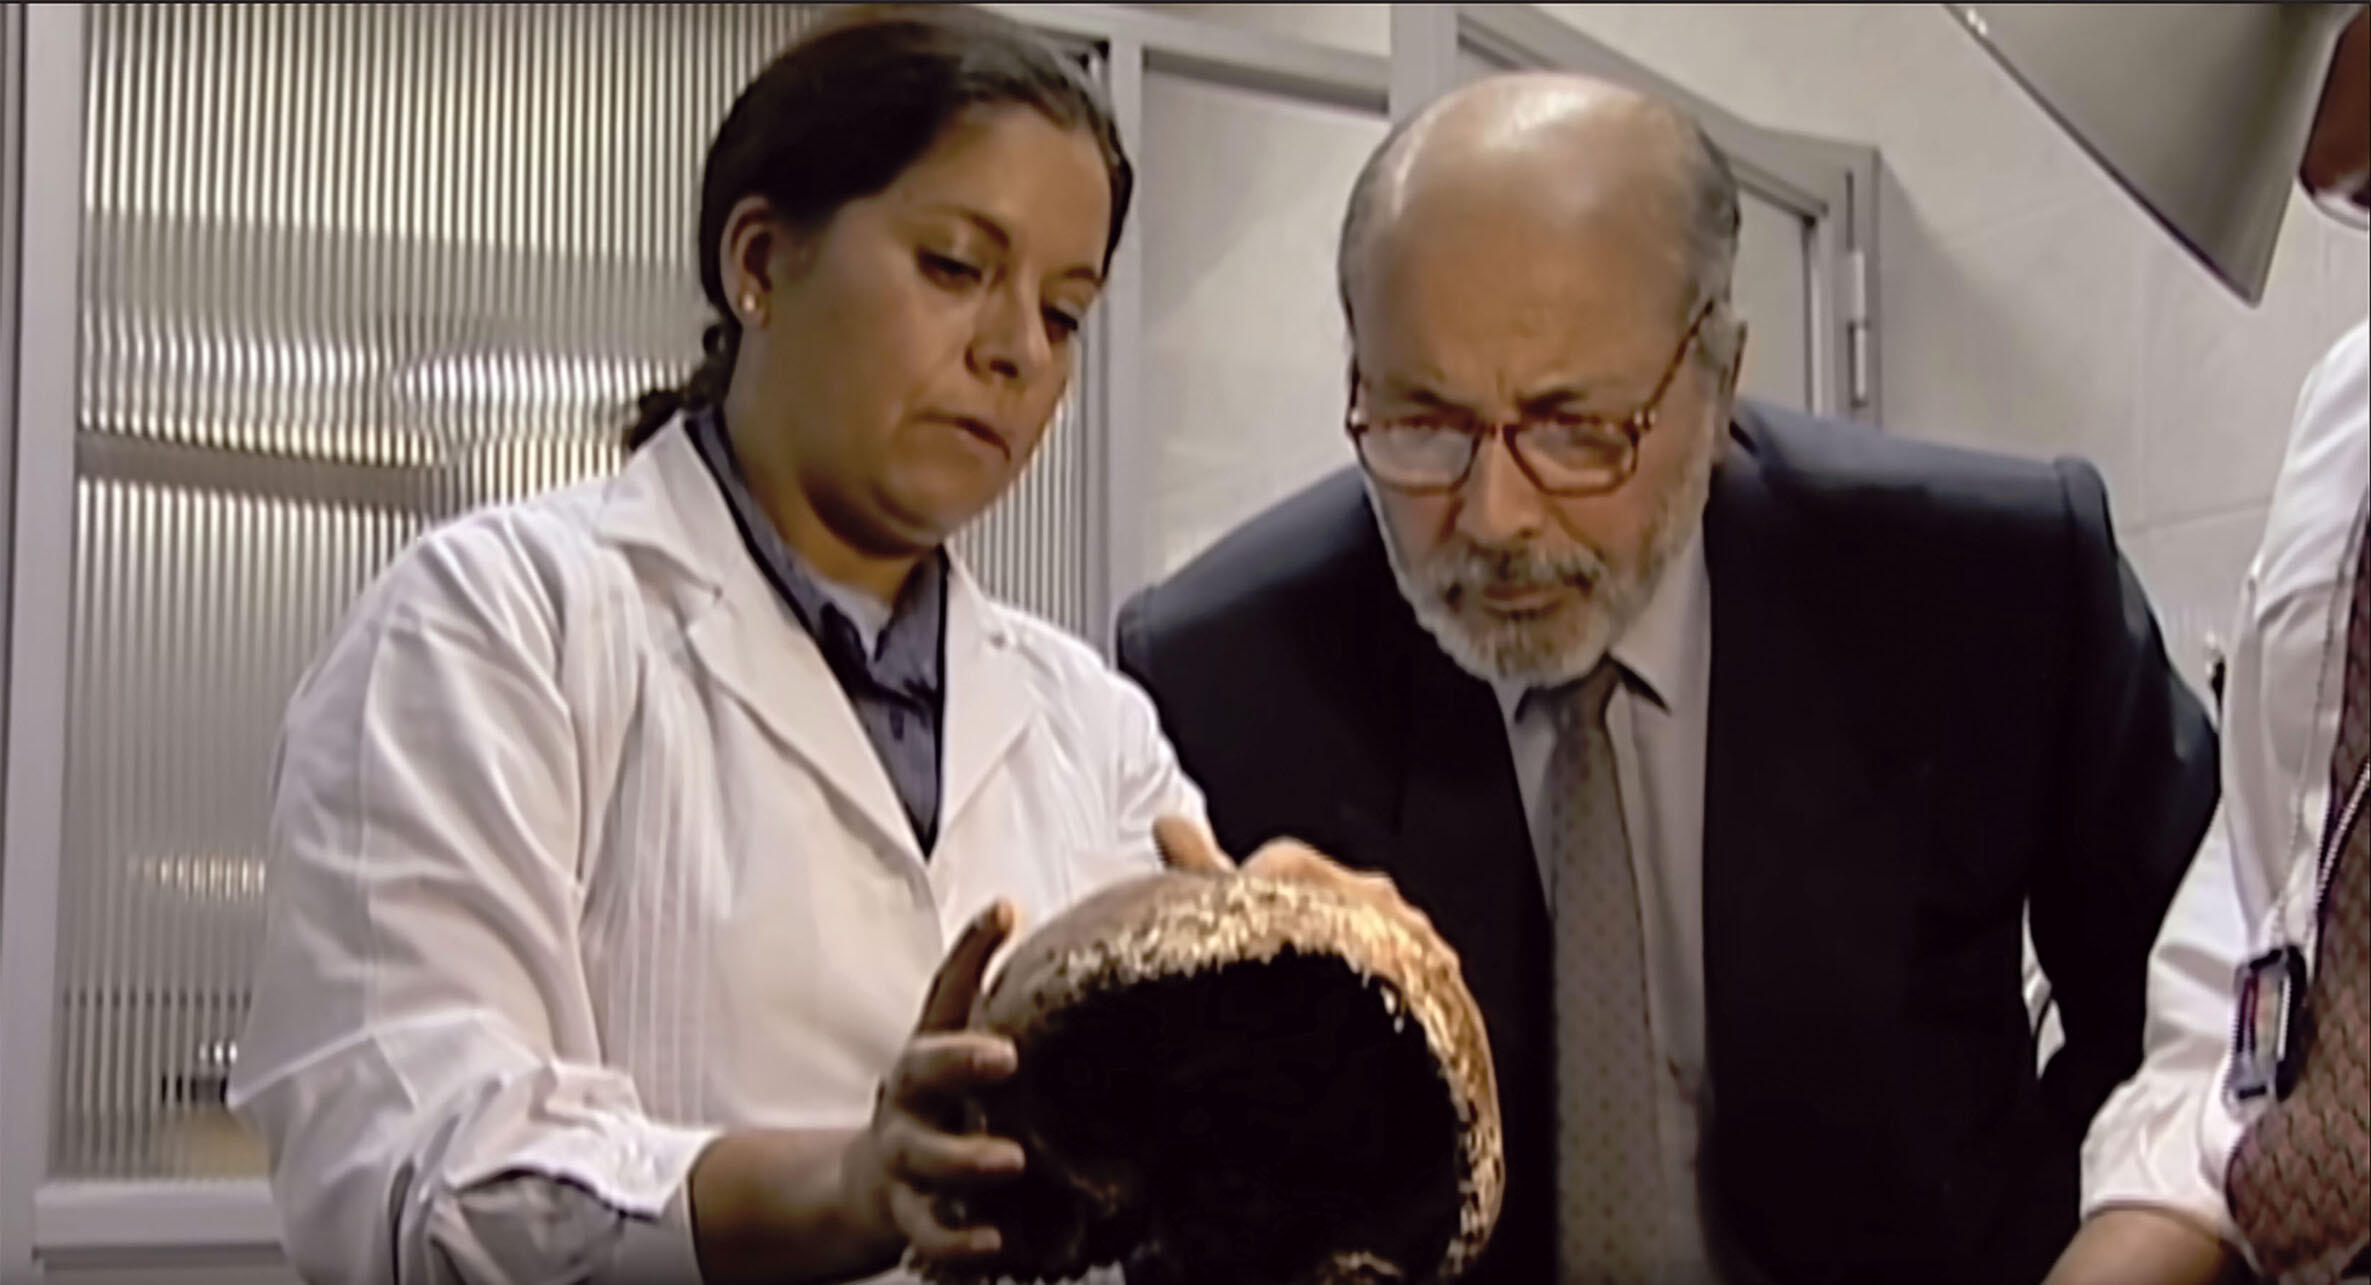 Judge Guzmán examines a victim’s skull with forensic anthropologist Isabel Reveco. (From The Judge and the General. Image courtesy of West Wind Productions.)